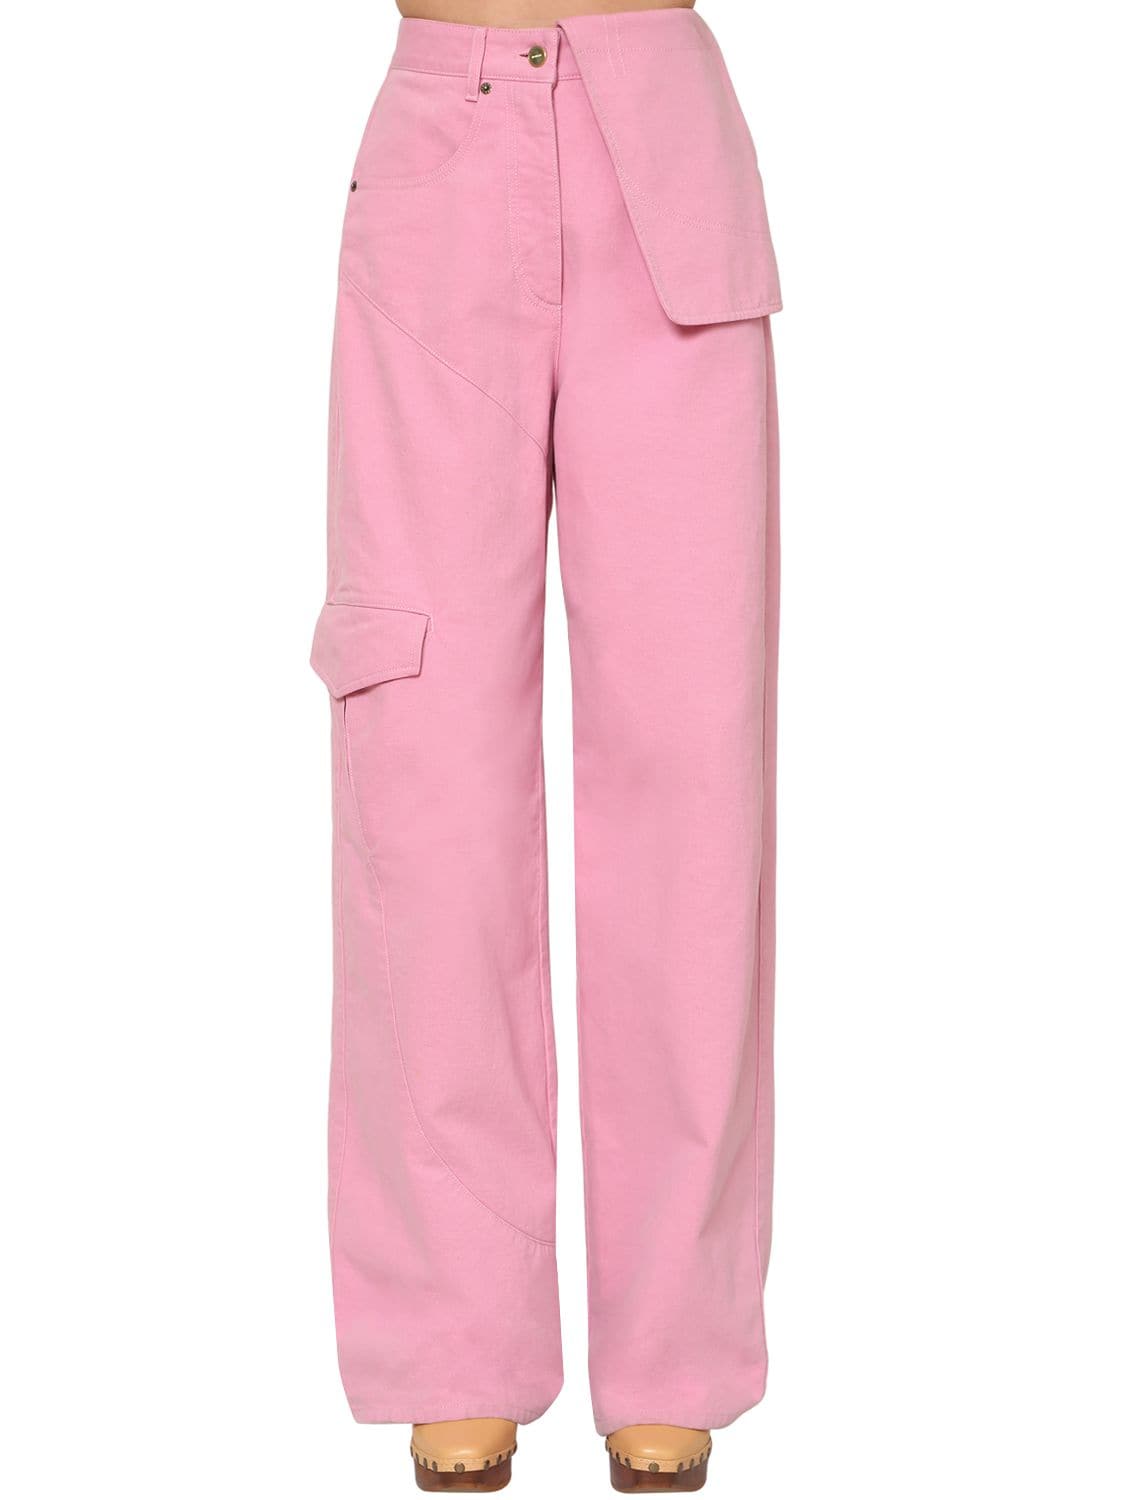 high waisted pink cargo pants